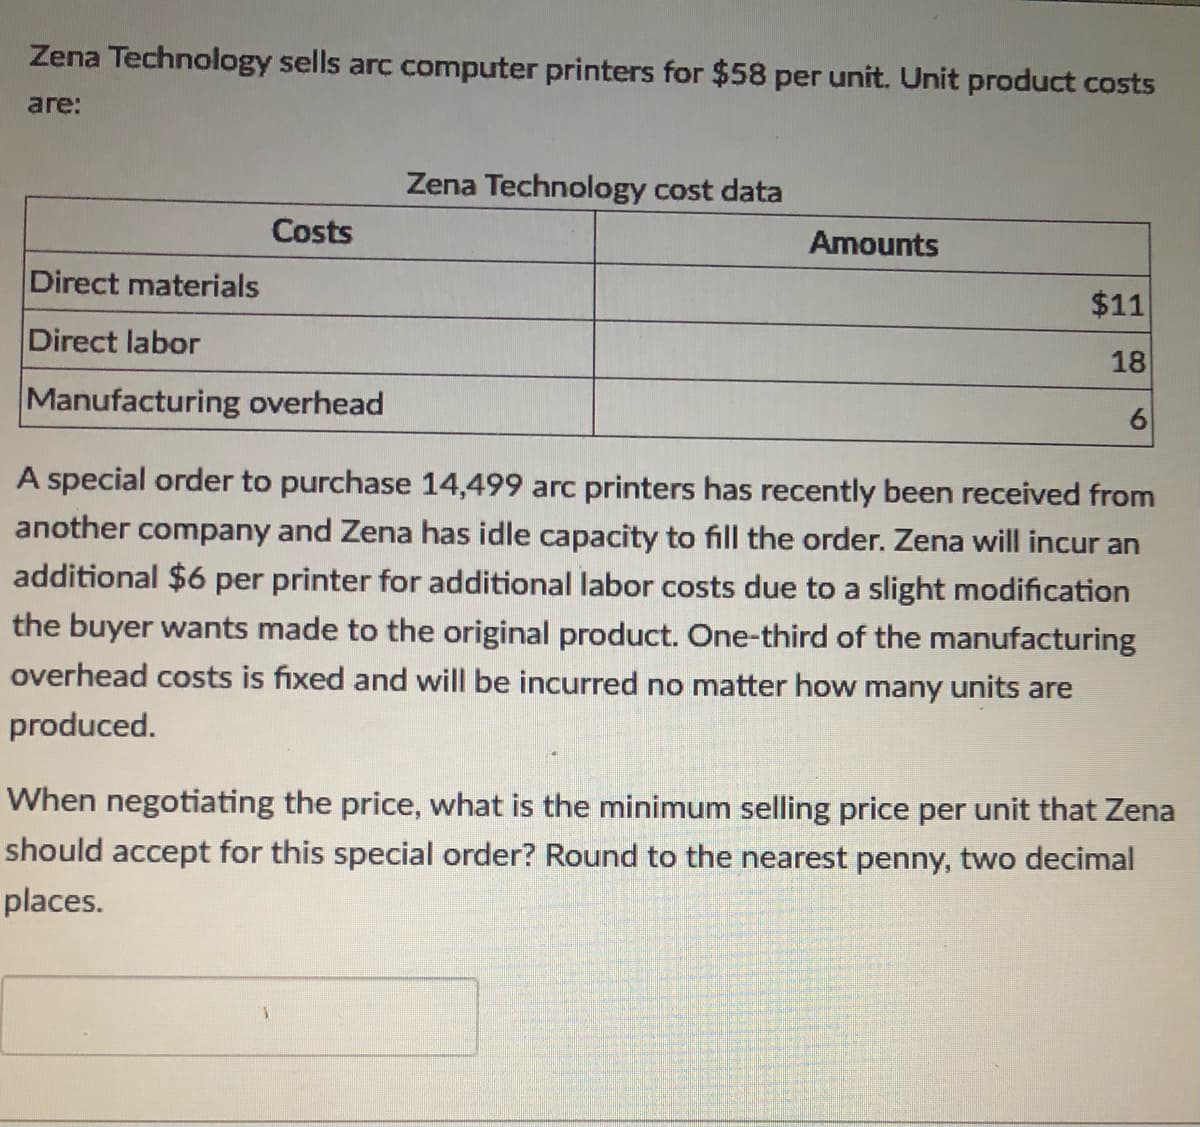 Zena Technology sells arc computer printers for $58 per unit. Unit product costs
are:
Zena Technology cost data
Costs
Amounts
Direct materials
$11
Direct labor
18
Manufacturing overhead
A special order to purchase 14,499 arc printers has recently been received from
another company and Zena has idle capacity to fill the order. Zena will incur an
additional $6 per printer for additional labor costs due to a slight modification
the buyer wants made to the original product. One-third of the manufacturing
overhead costs is fixed and will be incurred no matter how many units are
produced.
When negotiating the price, what is the minimum selling price per unit that Zena
should accept for this special order? Round to the nearest penny, two decimal
places.
